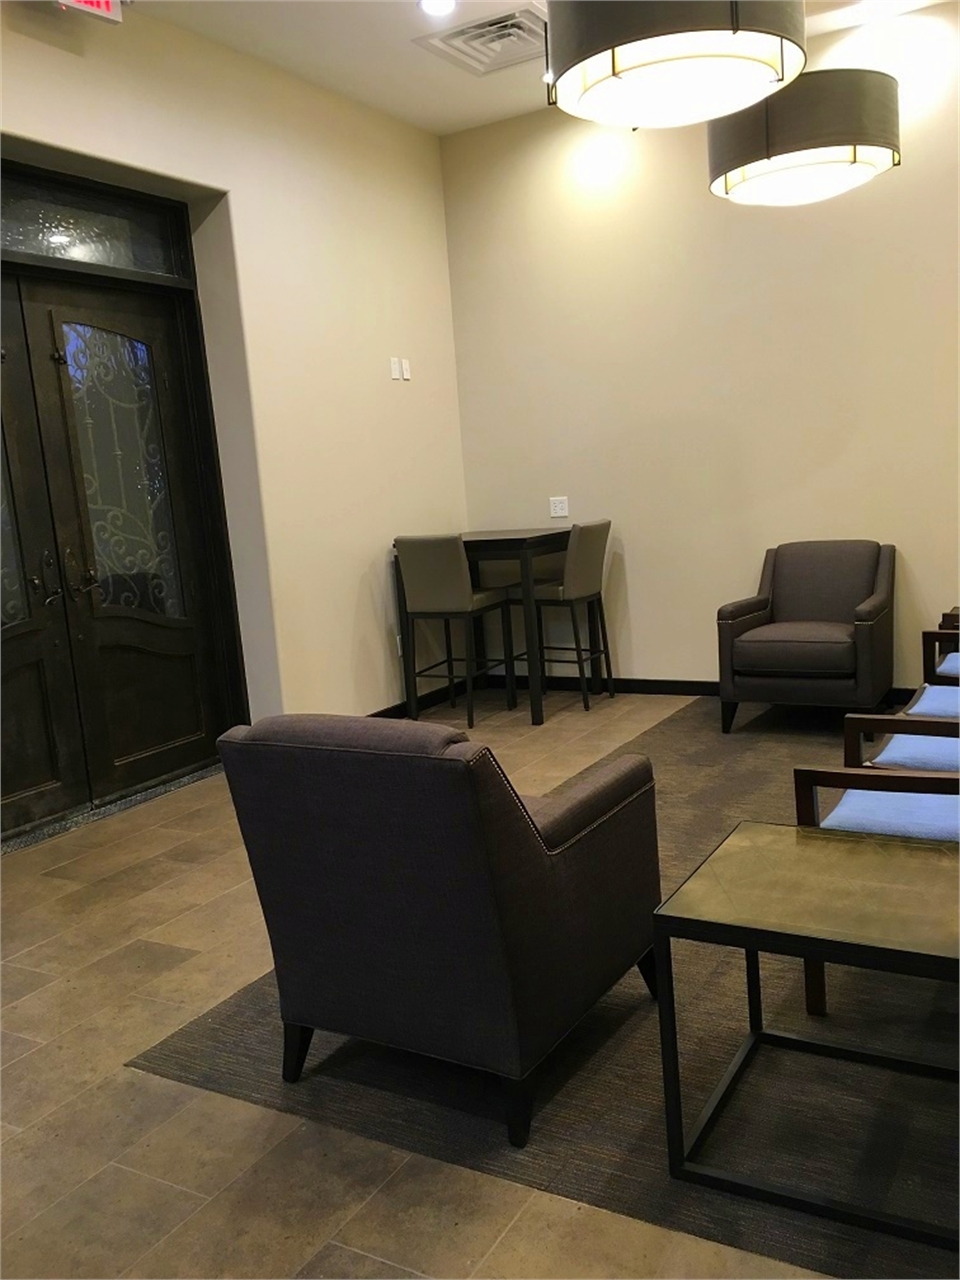 Patient lounge at Dentistry By Design located just 8 miles to the north of Cottonwood Park Richardso